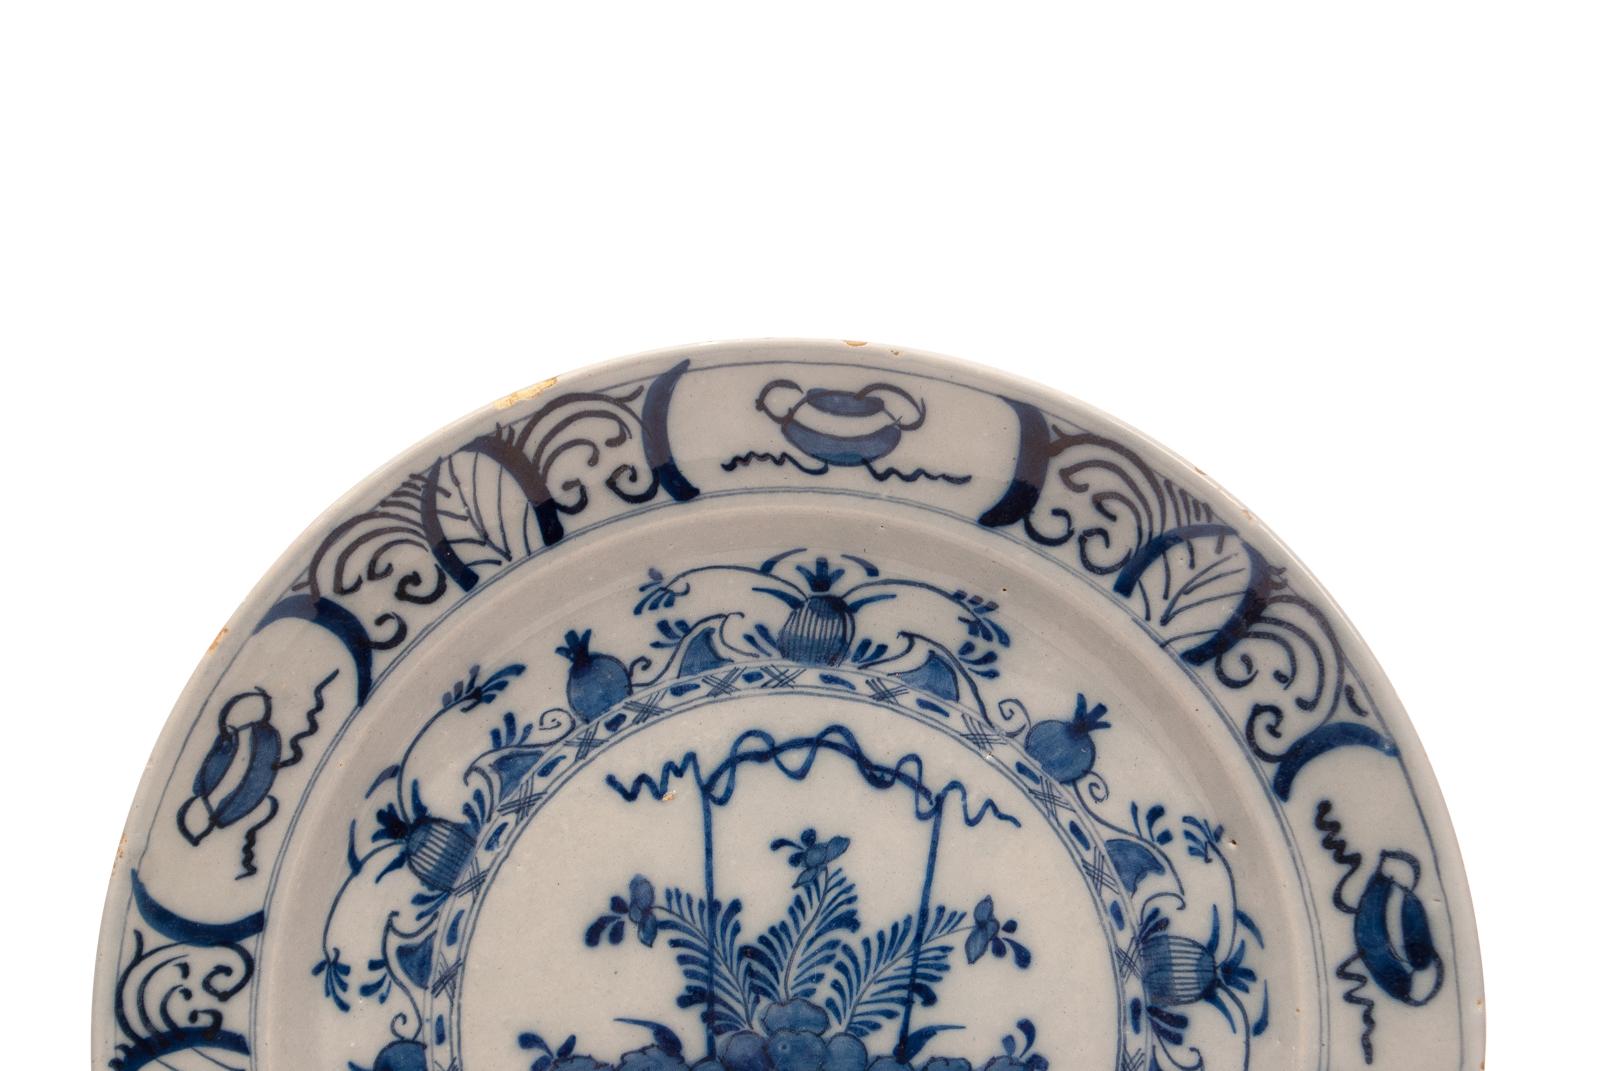 Delft Pottery Charger, Holland, circa 17th-18th Century (Barock)